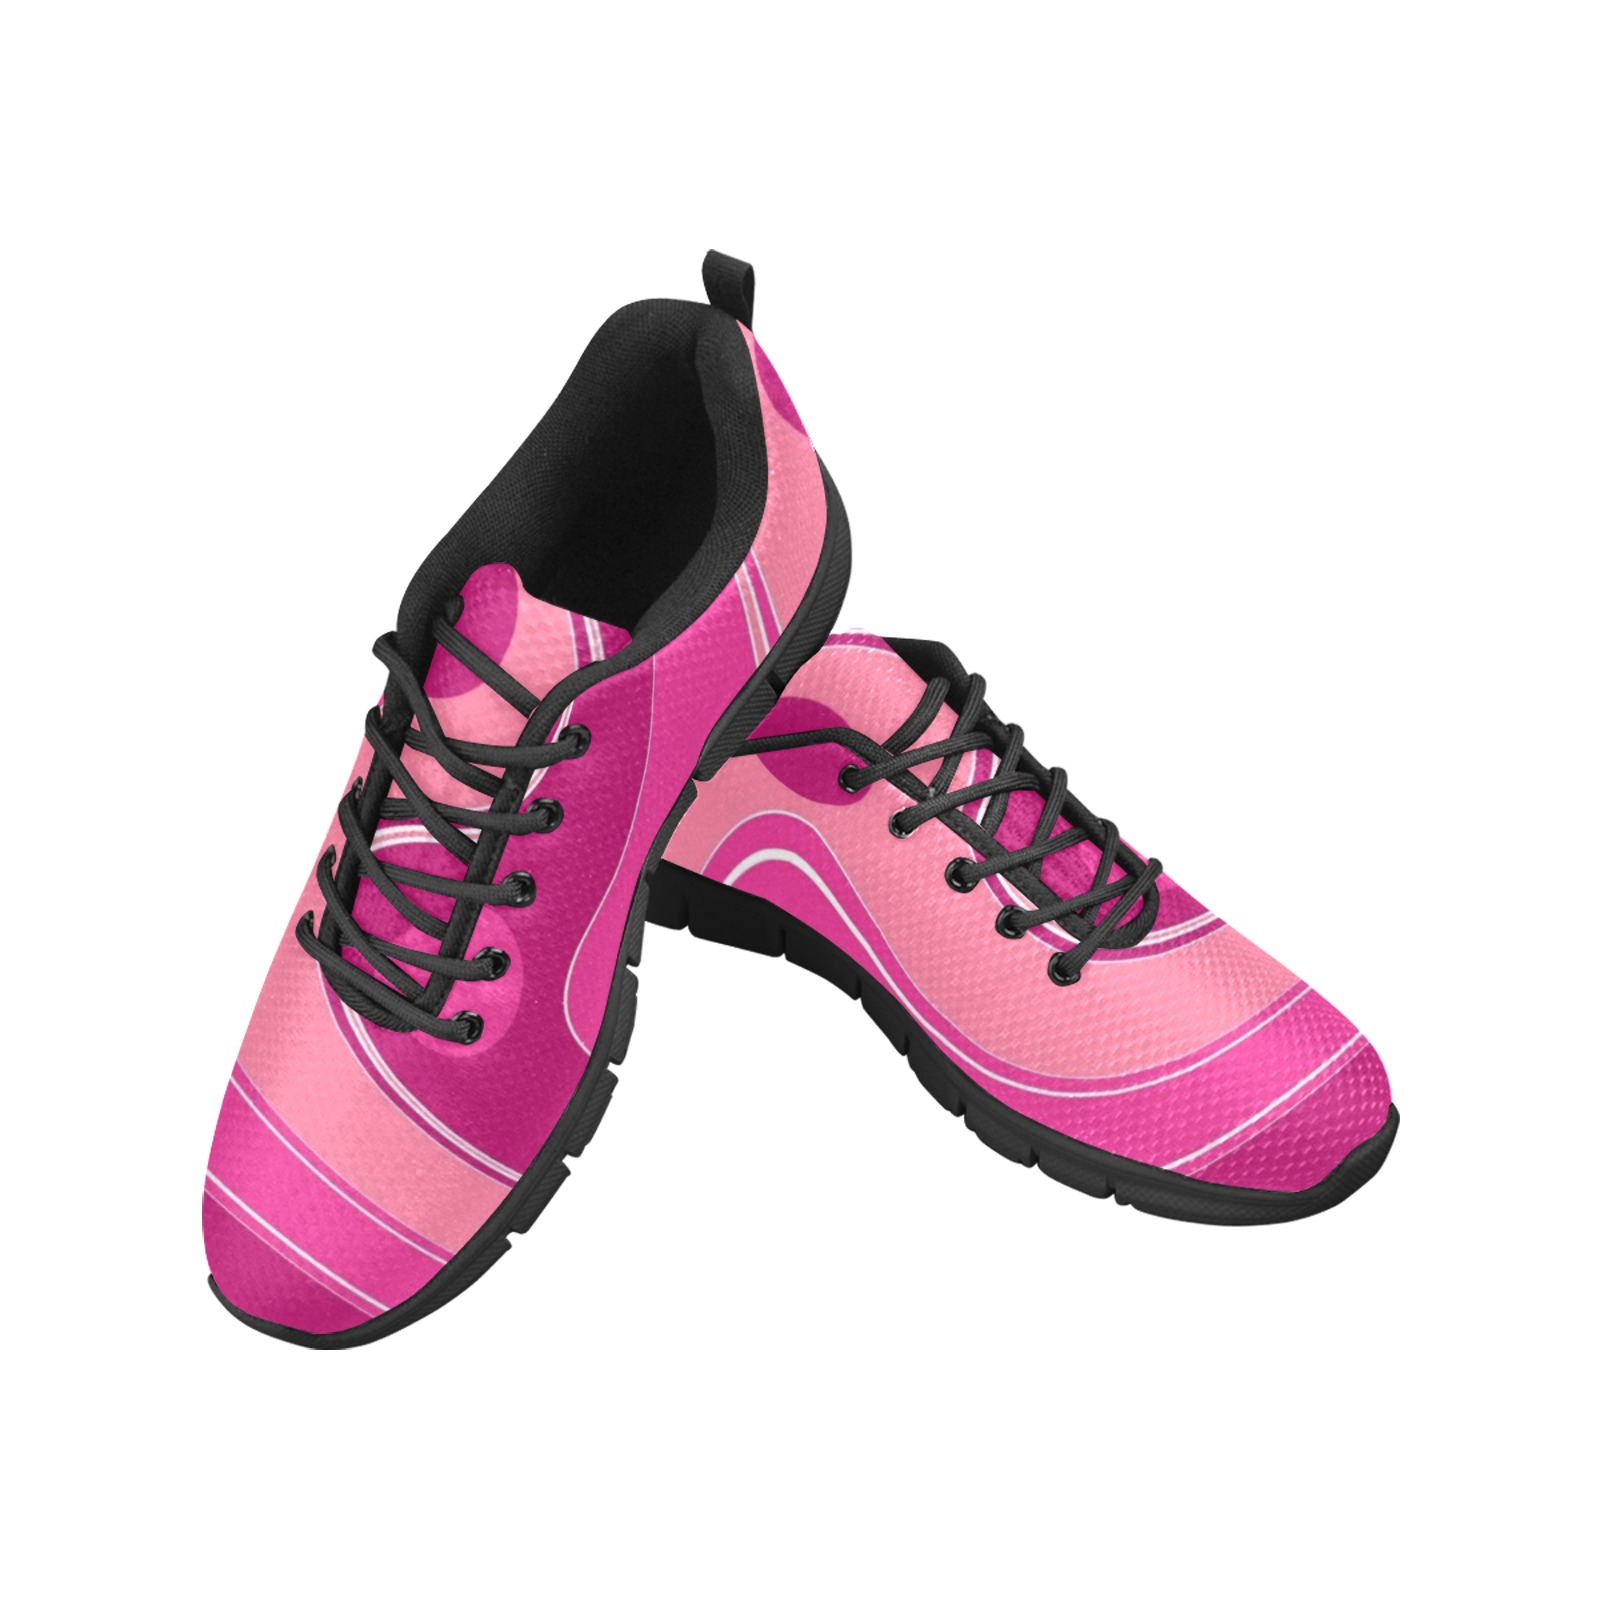 IN THE PINK-122 ALT Men's Breathable Running Shoes (Model 055)